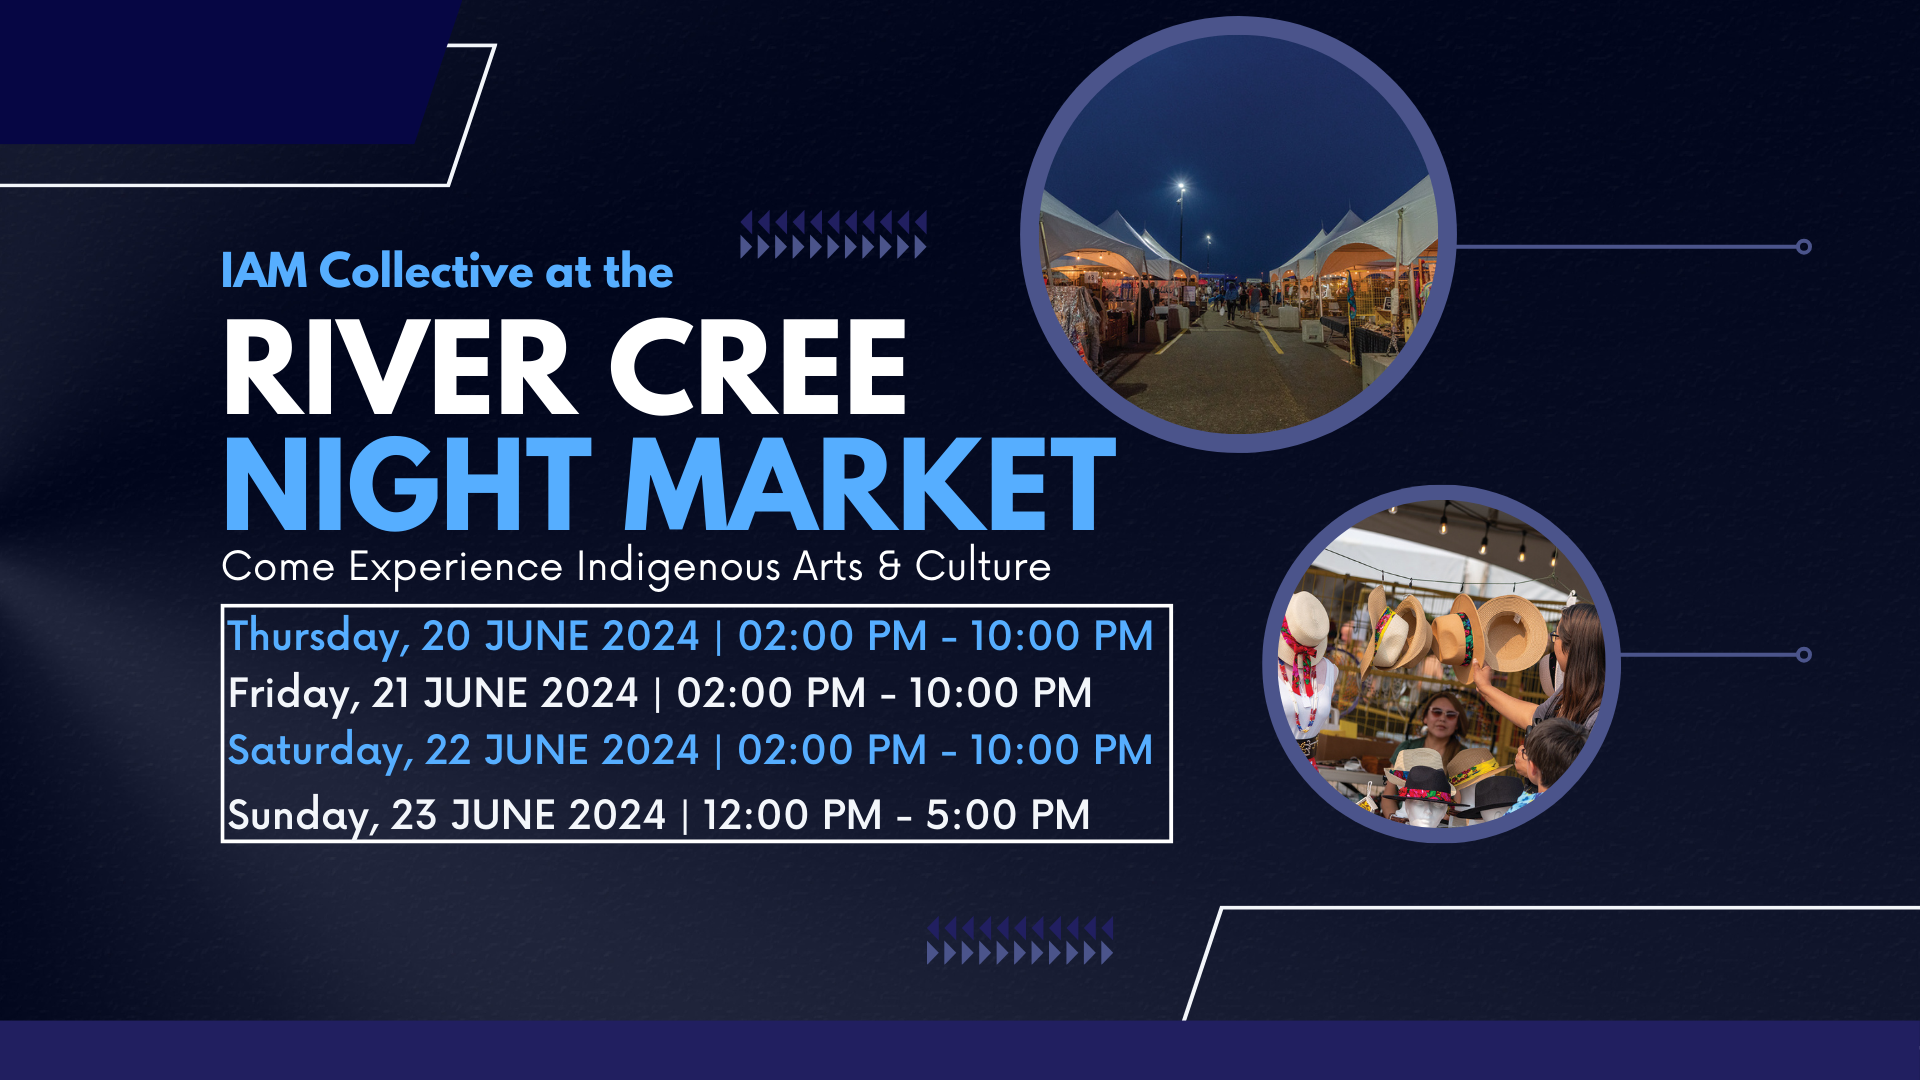 Featured image for “IAM Collective at the RIVER CREE NIGHT MARKET JUNE 20-23”